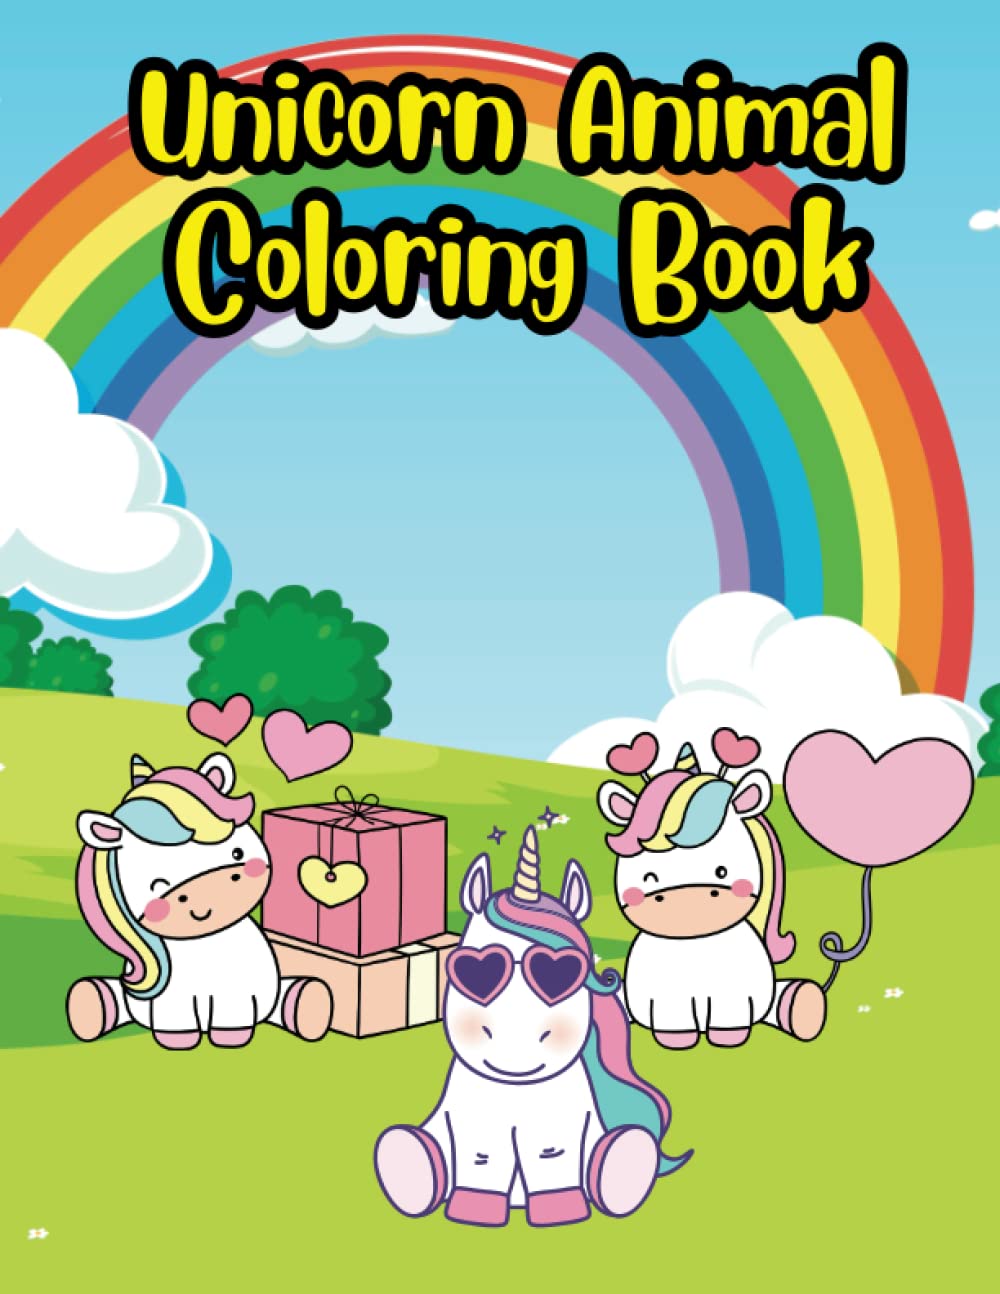 Unicorn coloring book: For Kids Ages 4-8. Sweet world of unicorns